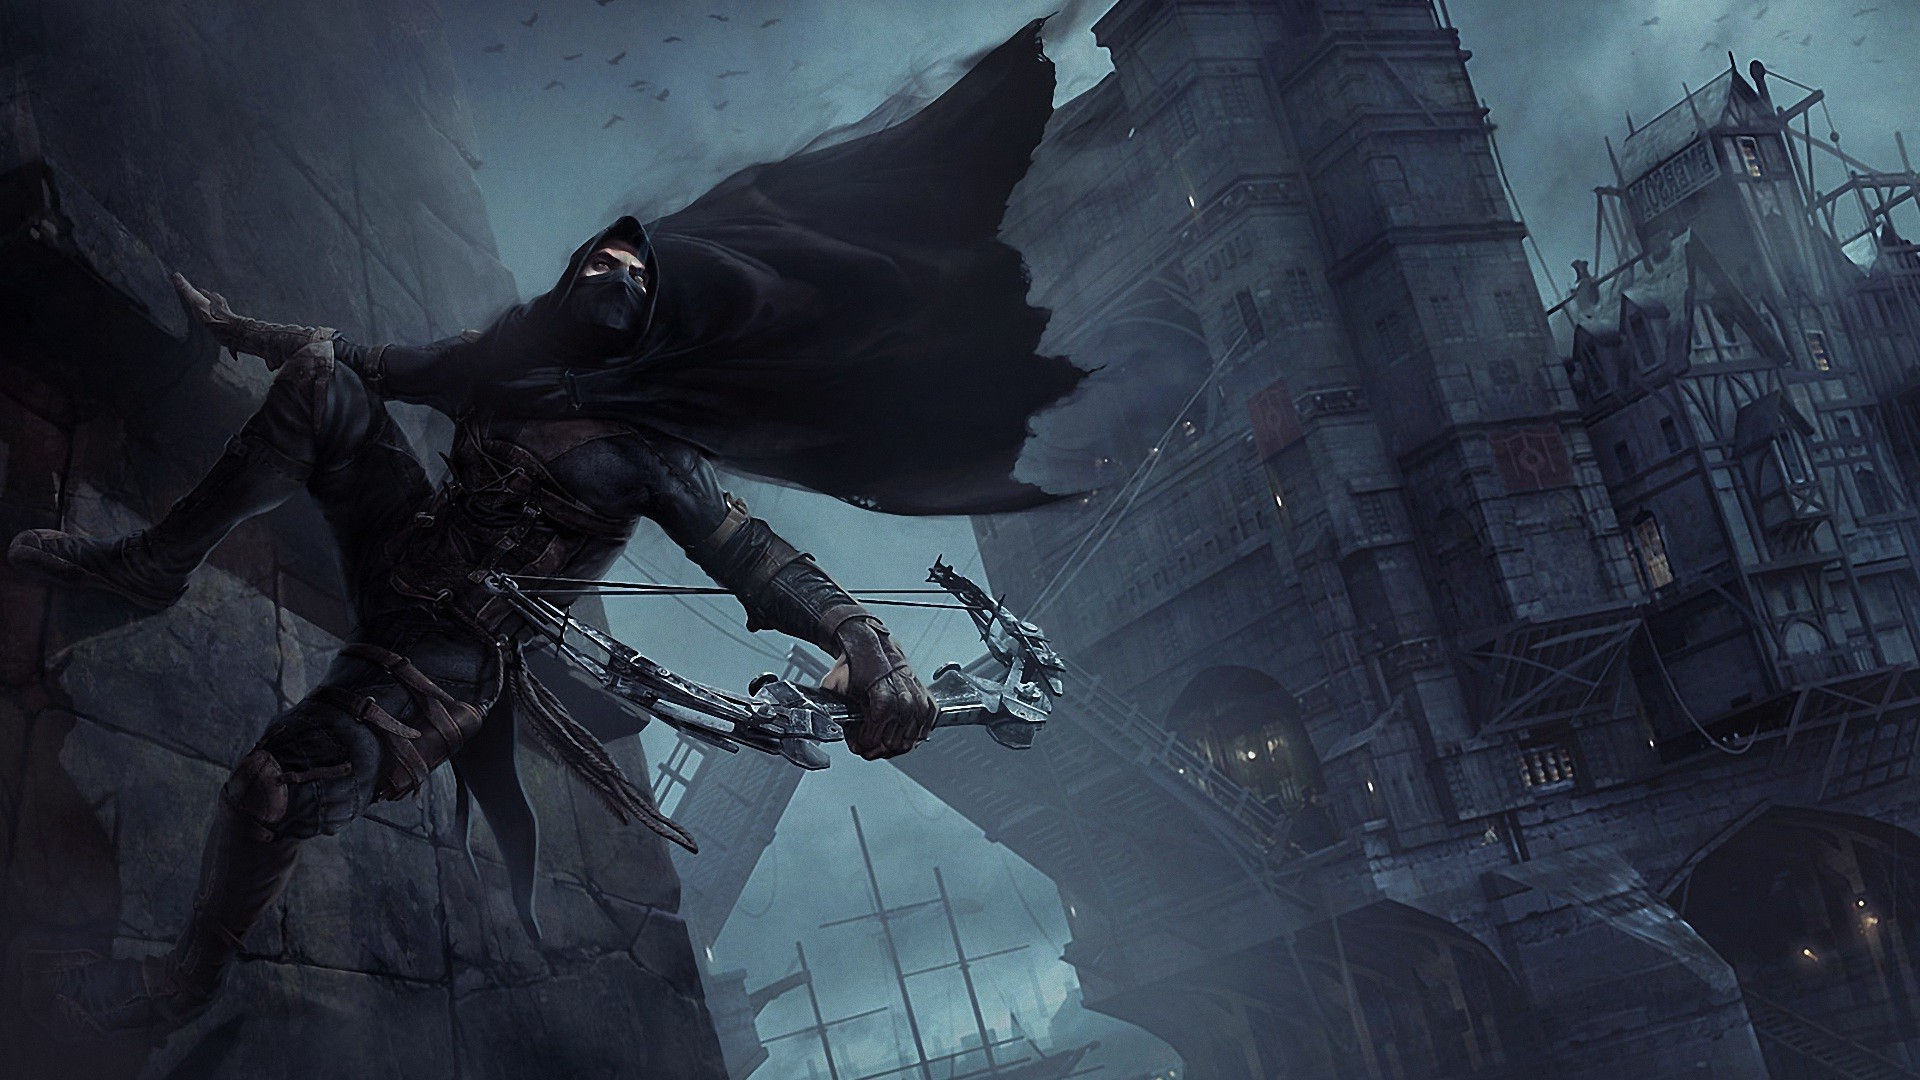 1920x1080 New Thief Game And Movie In Development, According To Straight Up Films -  Gaming Central